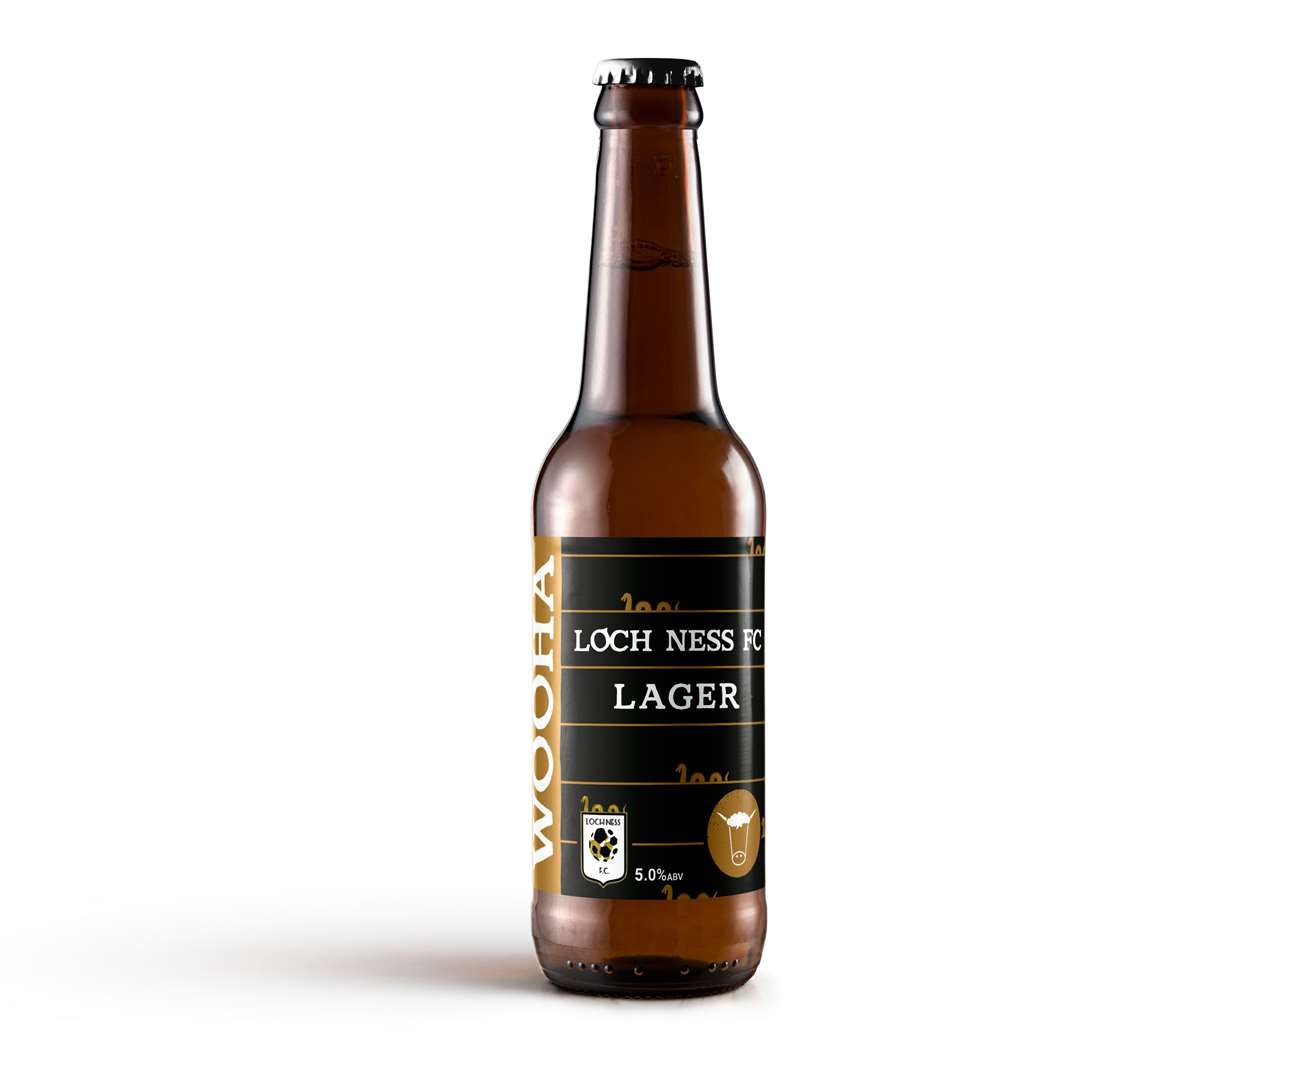 Sales of the limited edition beer will contribute towards club funds.